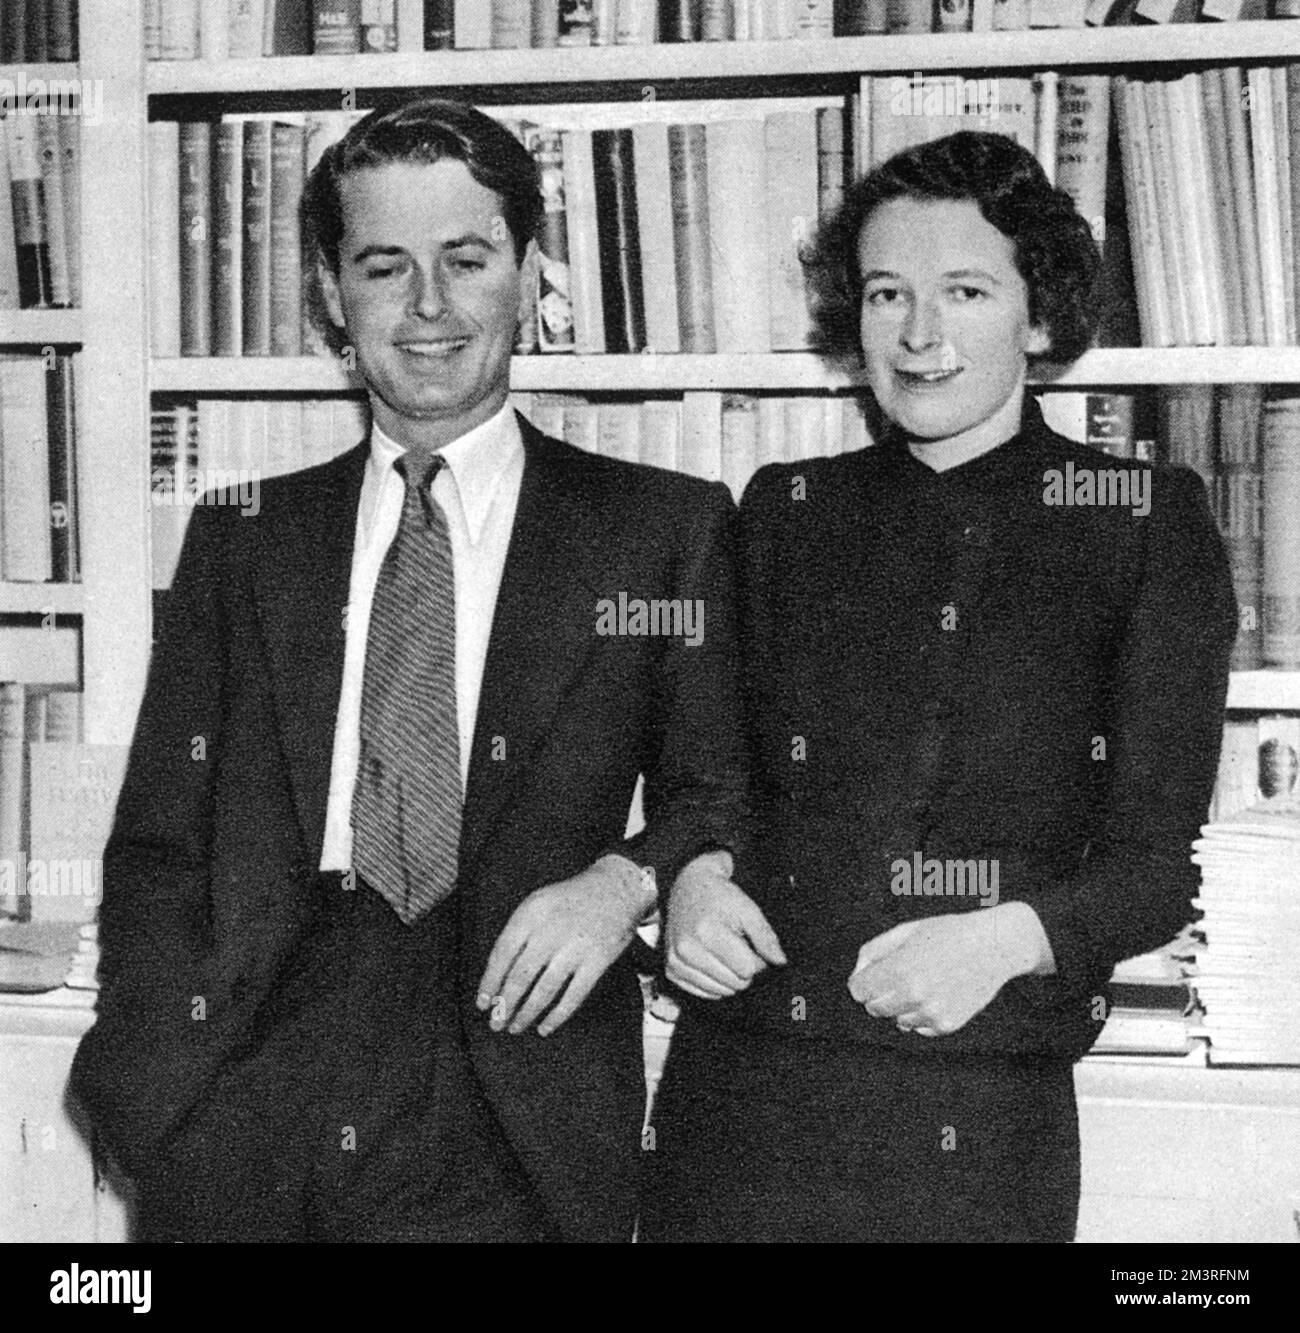 George Heywood Hill, son of Mr. and Mrs. Hill of Great Orchard, Bignor, Sussex and owner of the bookshop at 10 Curzon Street, together with his wife-to-be Lady Anne Gathorne-Hardy.  1937 Stock Photo